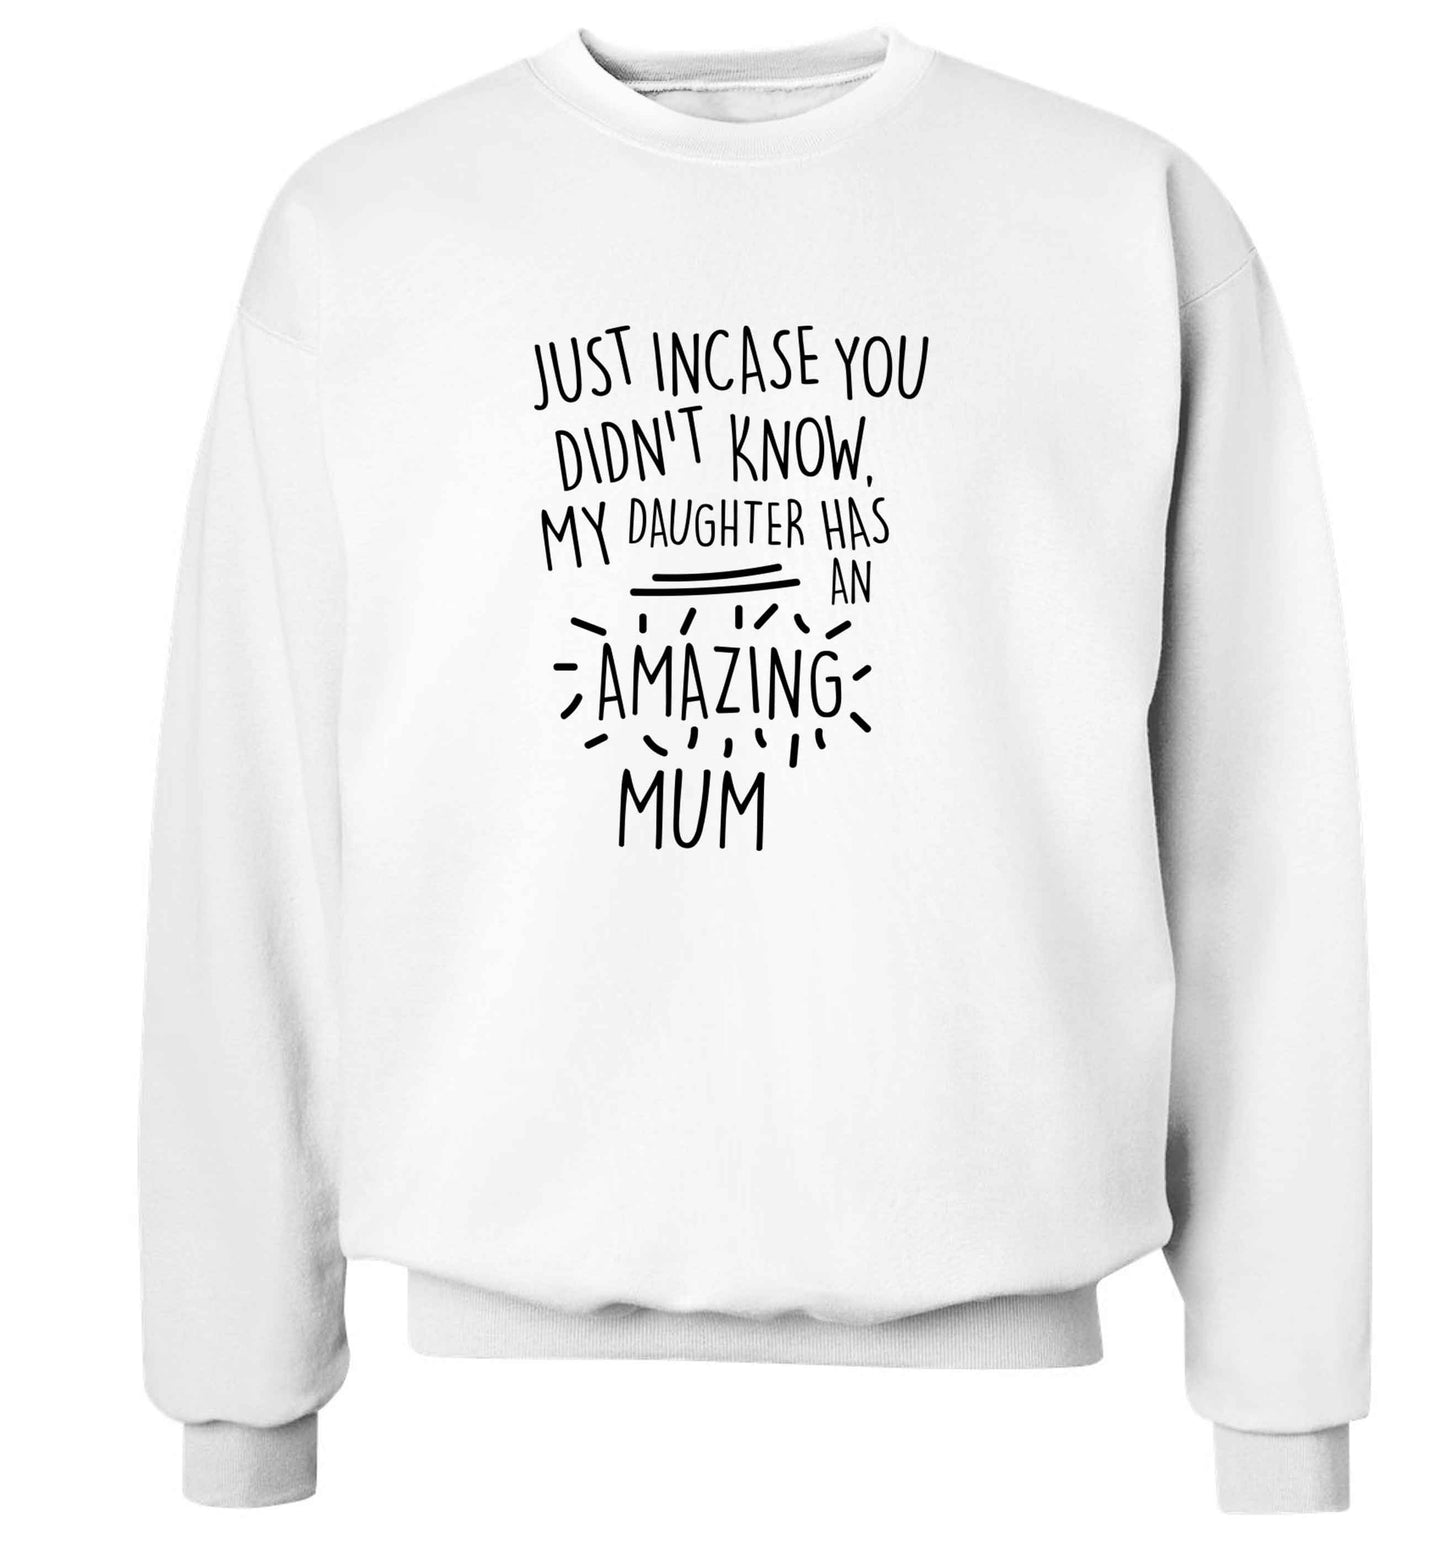 Just incase you didn't know my daughter has an amazing mum adult's unisex white sweater 2XL